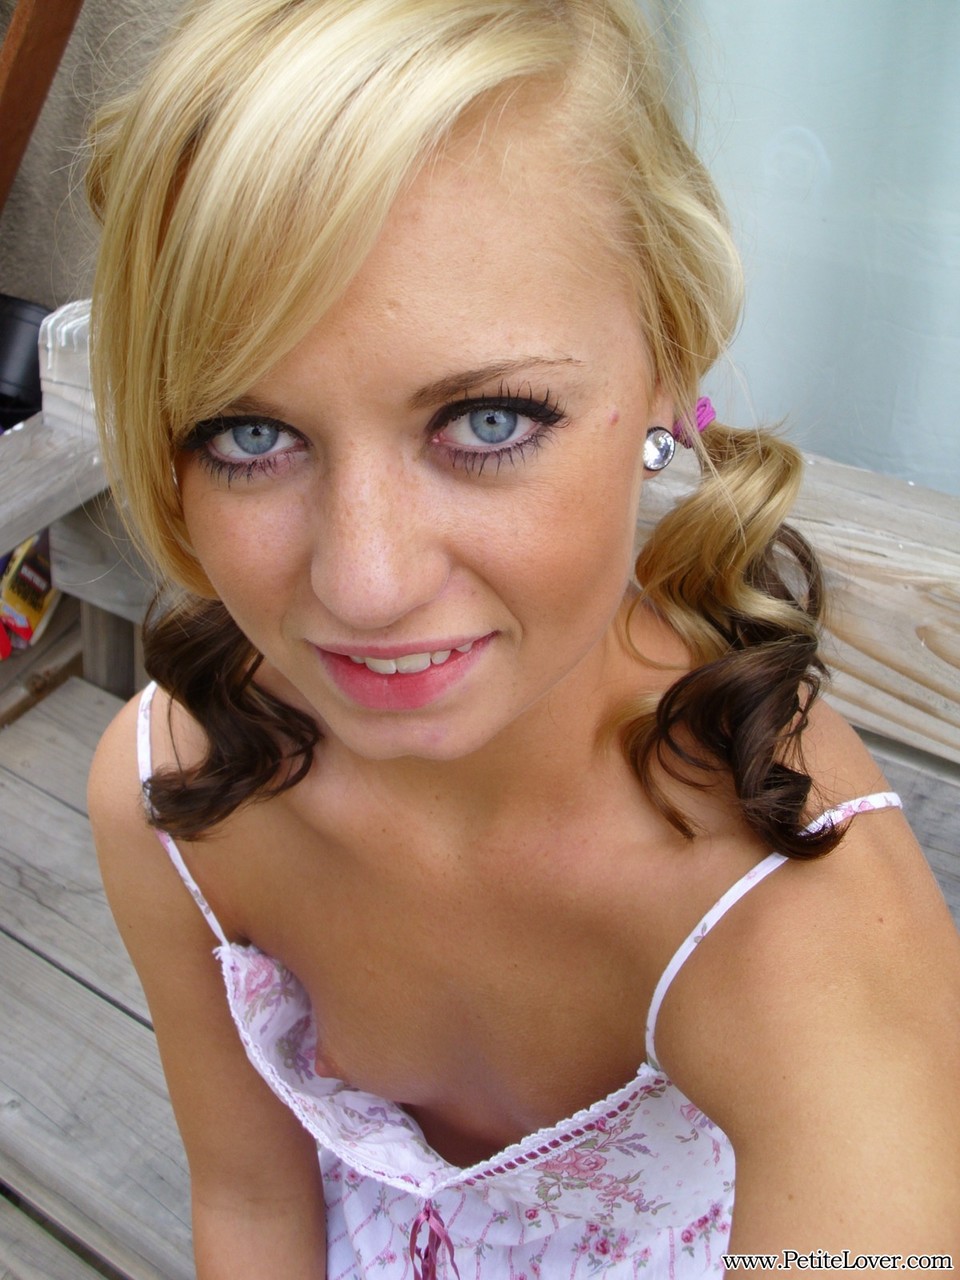 Cute blonde Tiff in pigtails showing off her wee small tits & tiny bald pussy Porno-Foto #428478636 | Petite Lover Pics, Tiff, Amateur, Mobiler Porno